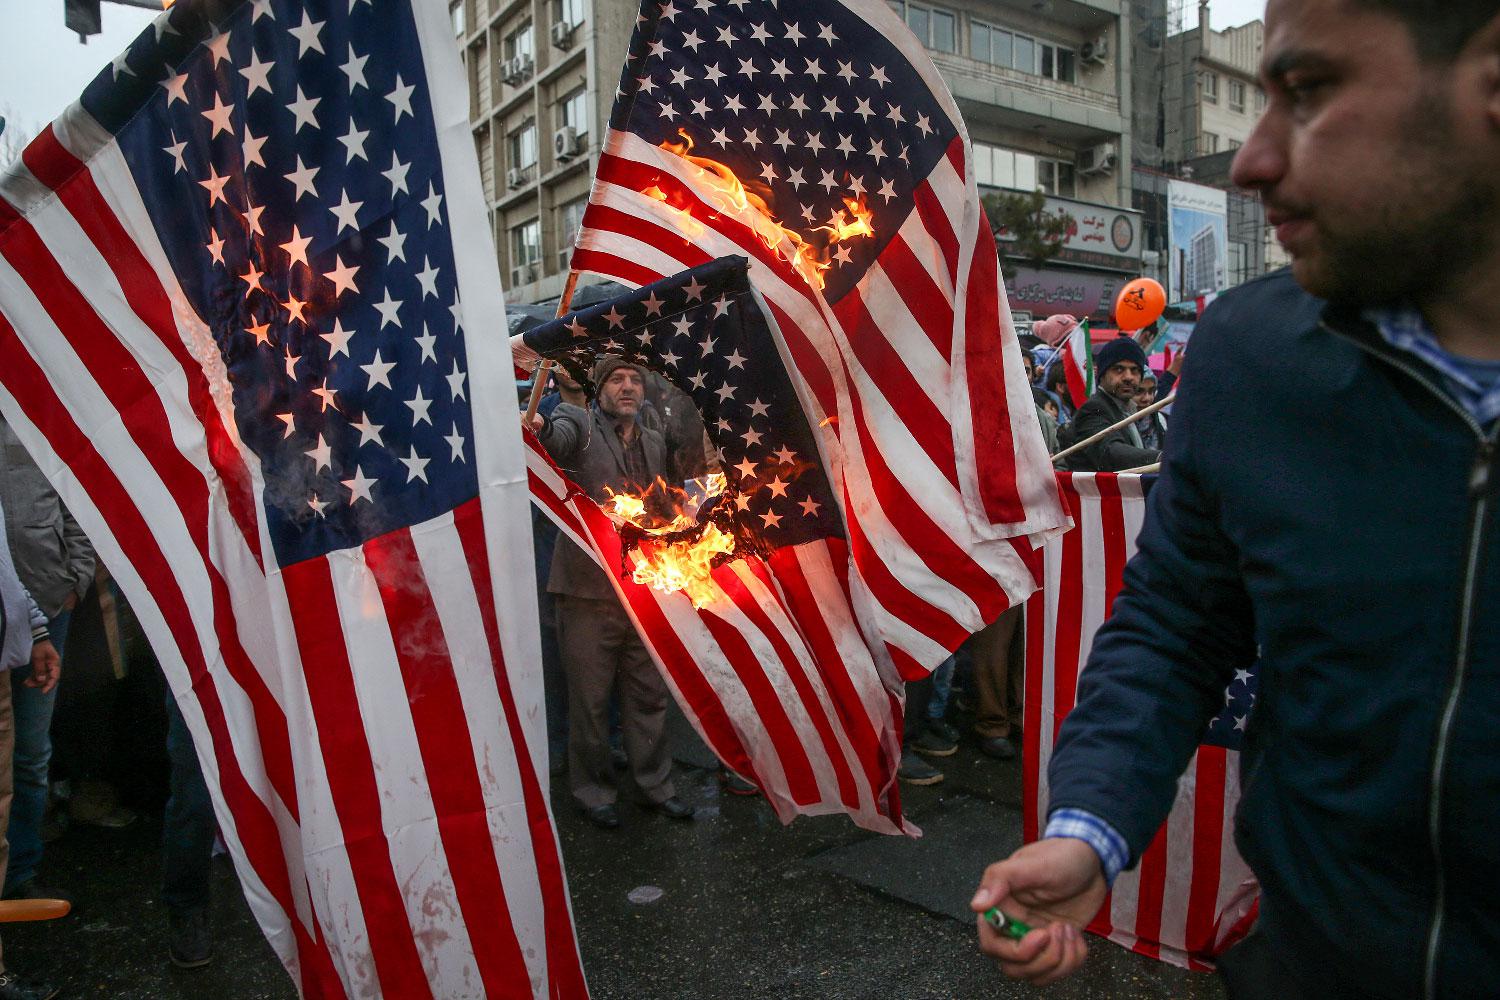 Iranians burn U.S. flags during a ceremony to mark the 40th anniversary of the Islamic Revolution in Tehran, Iran February 11, 2019. 